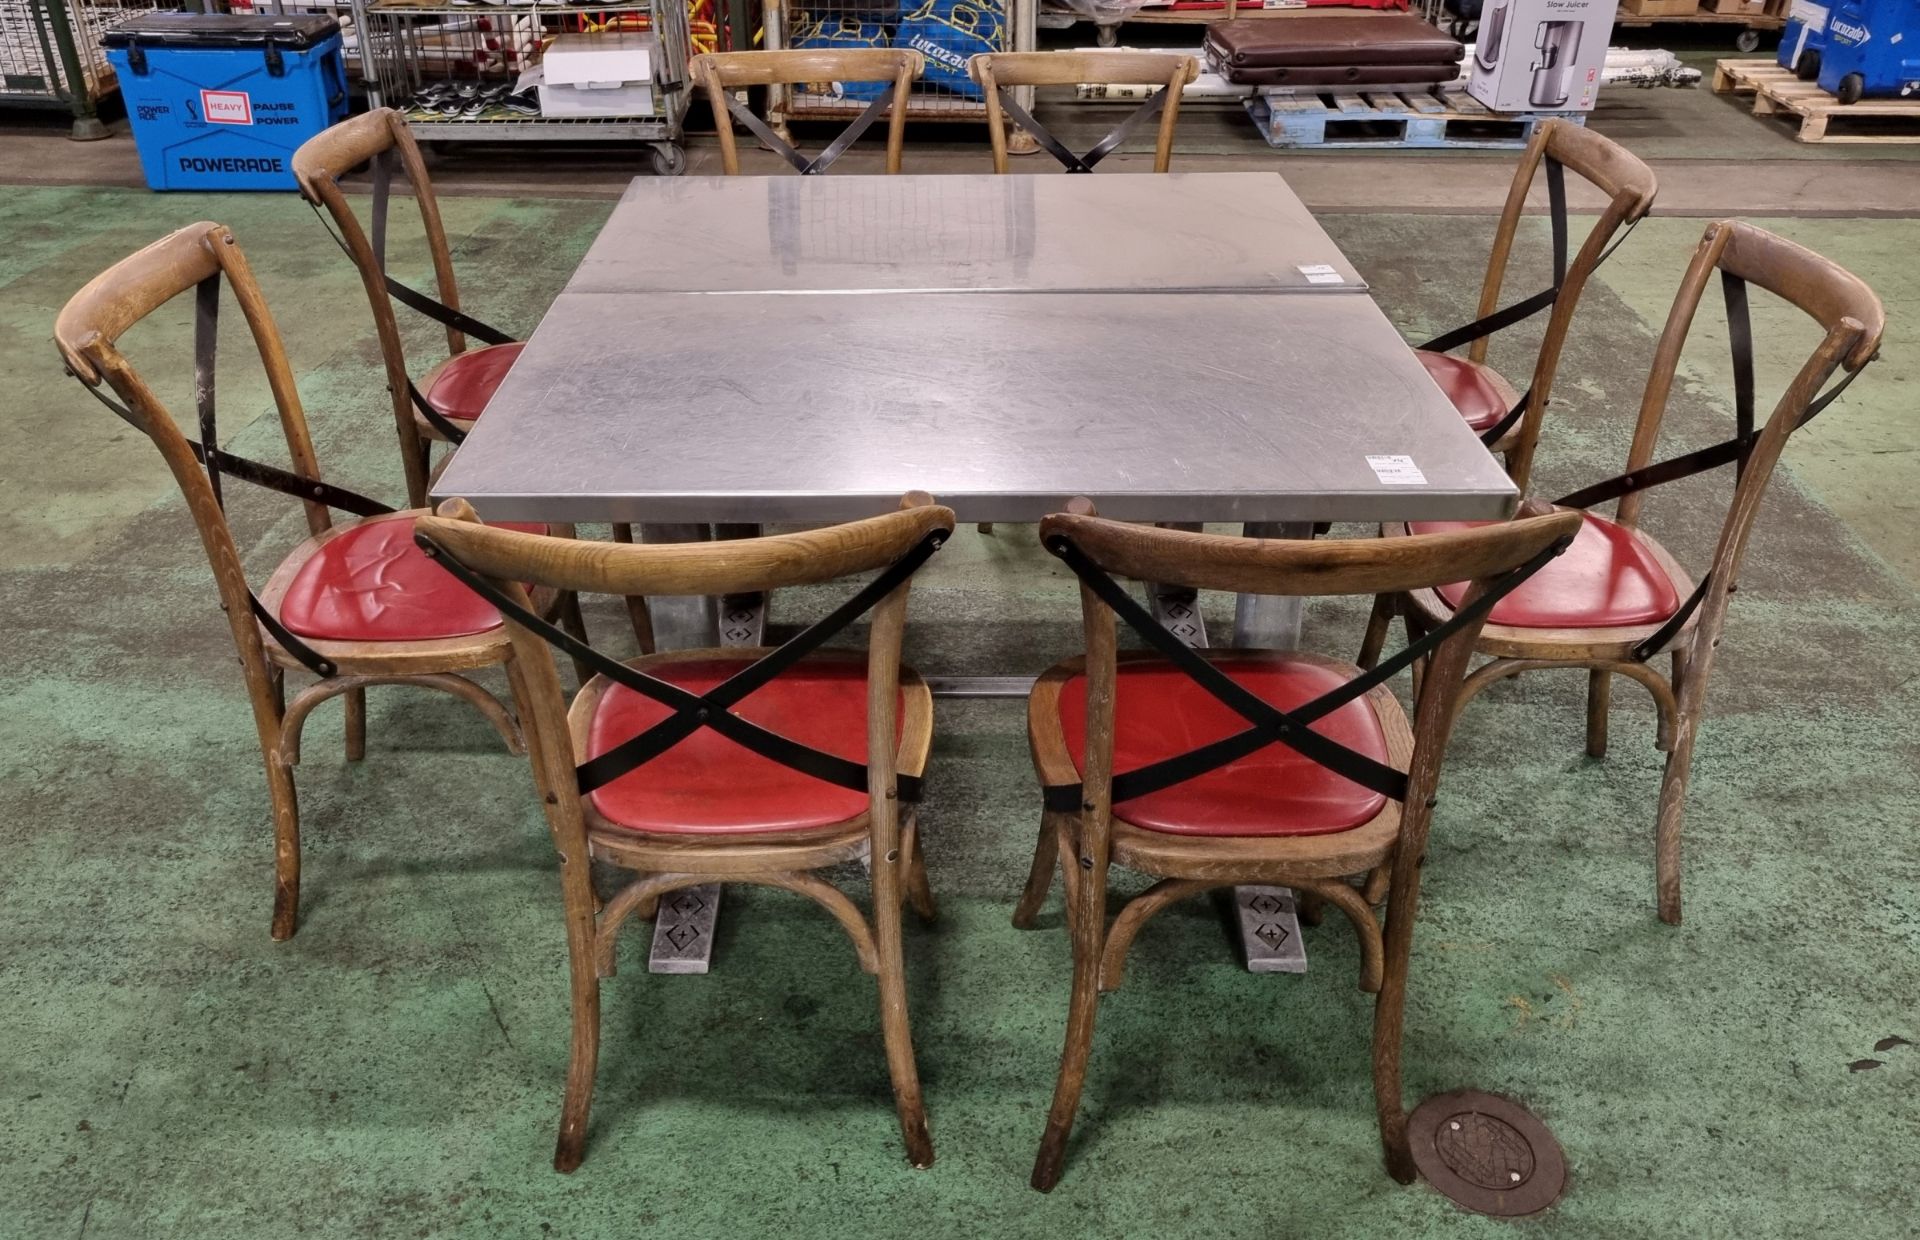 8x Wooden restaurant chairs, 2x Metal tables - W 1200 x D 690 x H 760 mm - Image 2 of 5